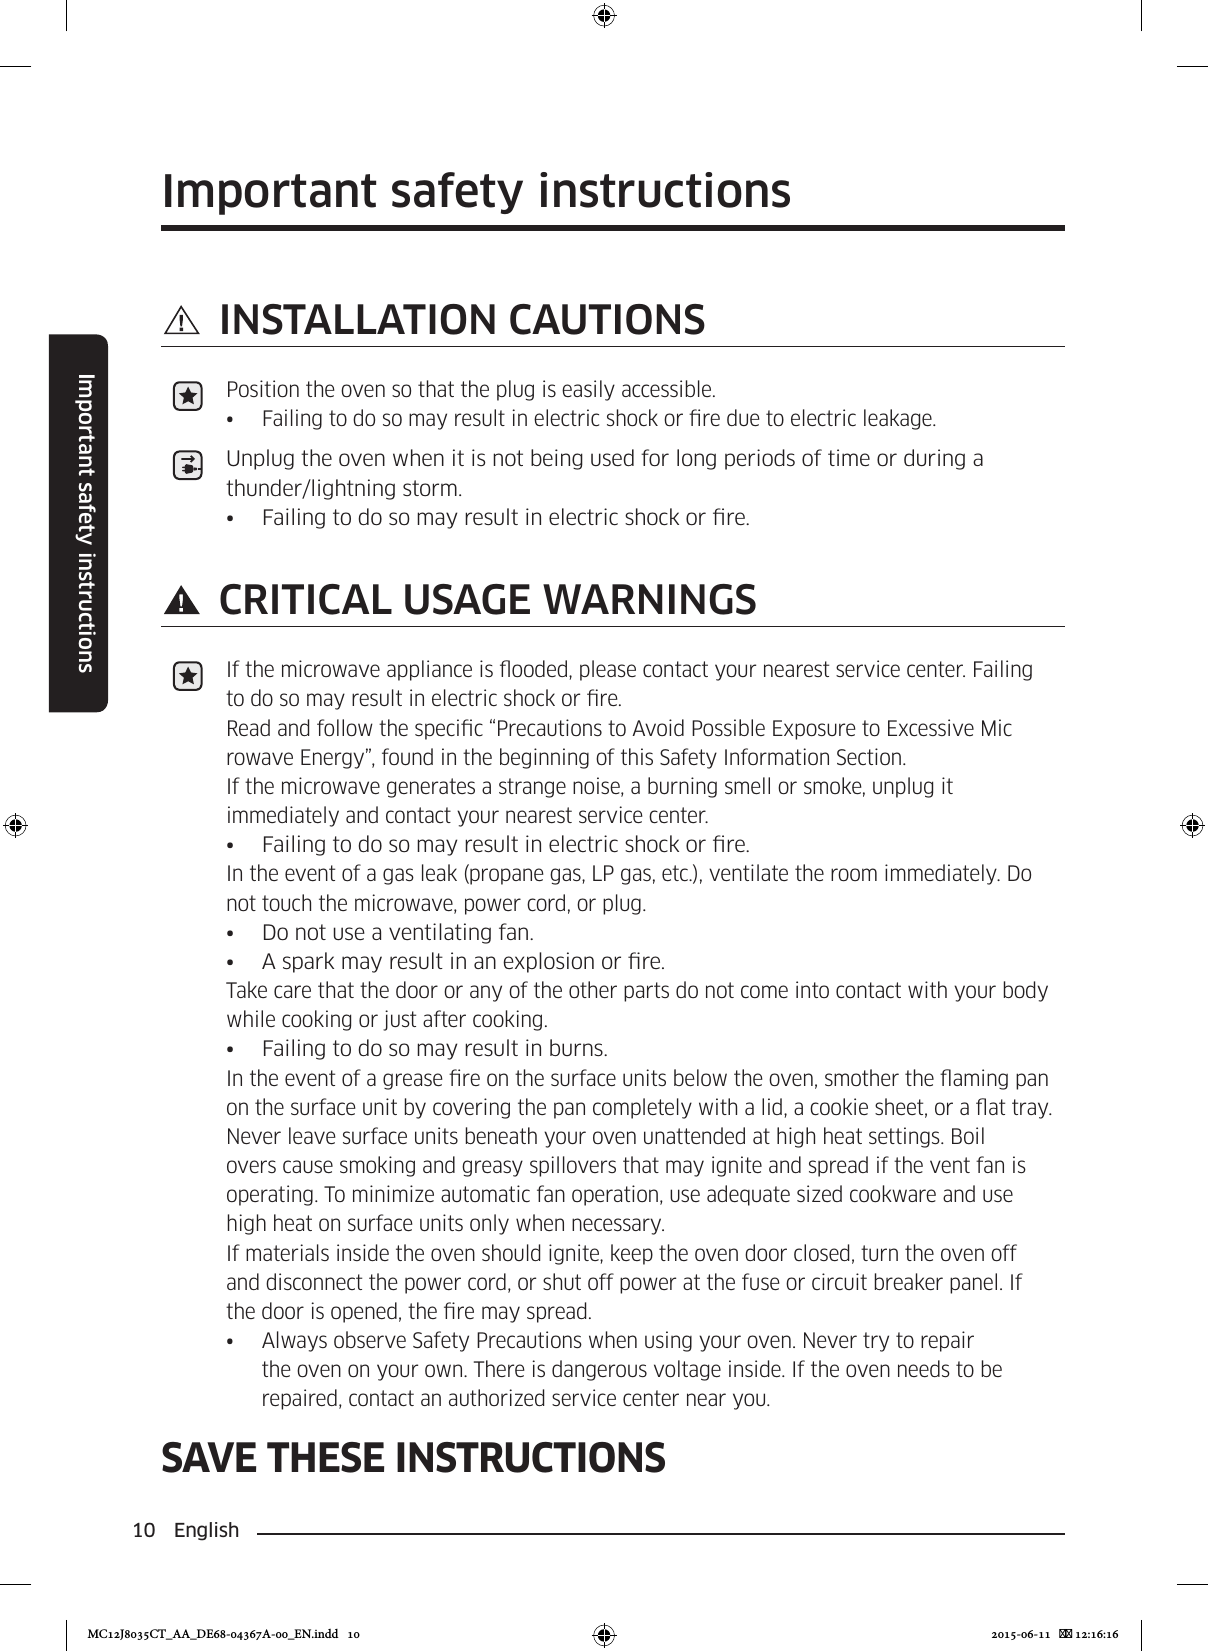 10 EnglishImportant safety instructionsSAVE THESE INSTRUCTIONSImportant safety instructions INSTALLATION CAUTIONSPosition the oven so that the plug is easily accessible.•  Failing to do so may result in electric shock or re due to electric leakage.Unplug the oven when it is not being used for long periods of time or during a thunder/lightning storm.•  Failing to do so may result in electric shock or re. CRITICAL USAGE WARNINGSIf the microwave appliance is ooded, please contact your nearest service center. Failing to do so may result in electric shock or re.Read and follow the specic “Precautions to Avoid Possible Exposure to Excessive Mic rowave Energy”, found in the beginning of this Safety Information Section.If the microwave generates a strange noise, a burning smell or smoke, unplug it immediately and contact your nearest service center.•  Failing to do so may result in electric shock or re.In the event of a gas leak (propane gas, LP gas, etc.), ventilate the room immediately. Do not touch the microwave, power cord, or plug.•  Do not use a ventilating fan.•  A spark may result in an explosion or re.Take care that the door or any of the other parts do not come into contact with your body while cooking or just after cooking.•  Failing to do so may result in burns.In the event of a grease re on the surface units below the oven, smother the aming pan on the surface unit by covering the pan completely with a lid, a cookie sheet, or a at tray.Never leave surface units beneath your oven unattended at high heat settings. Boil overs cause smoking and greasy spillovers that may ignite and spread if the vent fan is operating. To minimize automatic fan operation, use adequate sized cookware and use high heat on surface units only when necessary.If materials inside the oven should ignite, keep the oven door closed, turn the oven off and disconnect the power cord, or shut off power at the fuse or circuit breaker panel. If the door is opened, the re may spread.•  Always observe Safety Precautions when using your oven. Never try to repair the oven on your own. There is dangerous voltage inside. If the oven needs to be repaired, contact an authorized service center near you.MC12J8035CT_AA_DE68-04367A-00_EN.indd   10 2015-06-11    12:16:16